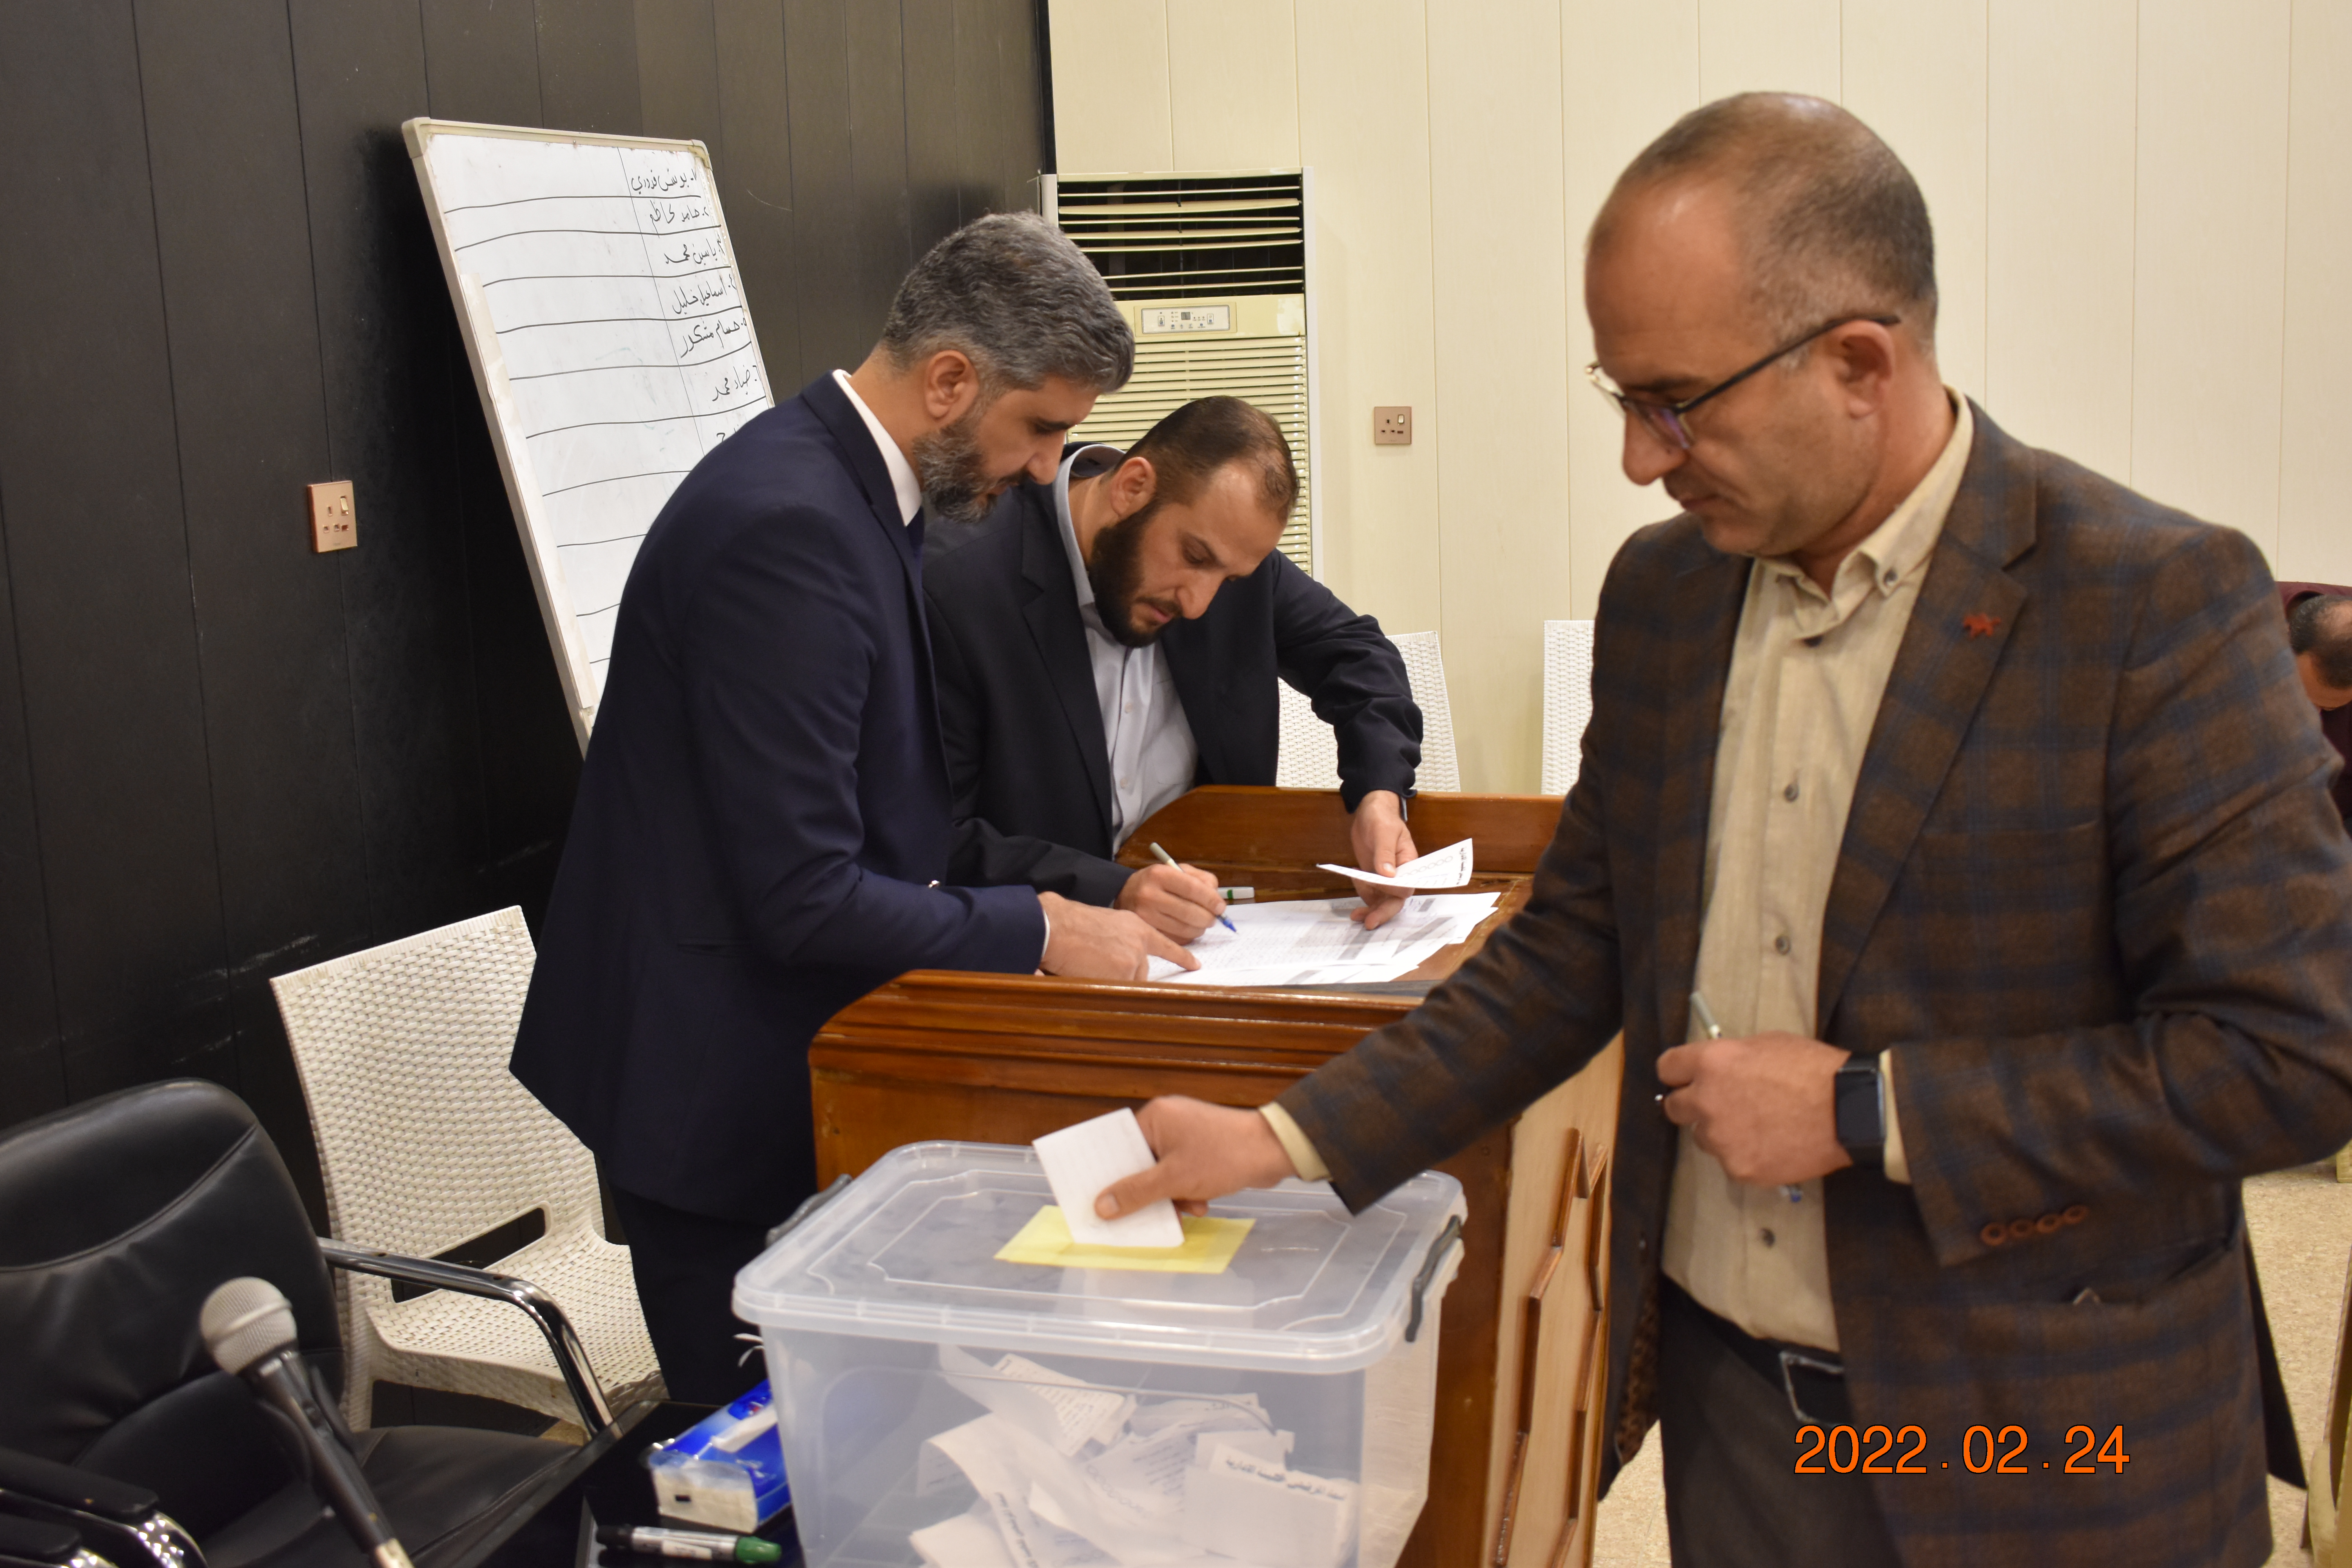 After the end of its previous term, the Association of Hadith Sciences held elections to select the administrative body.